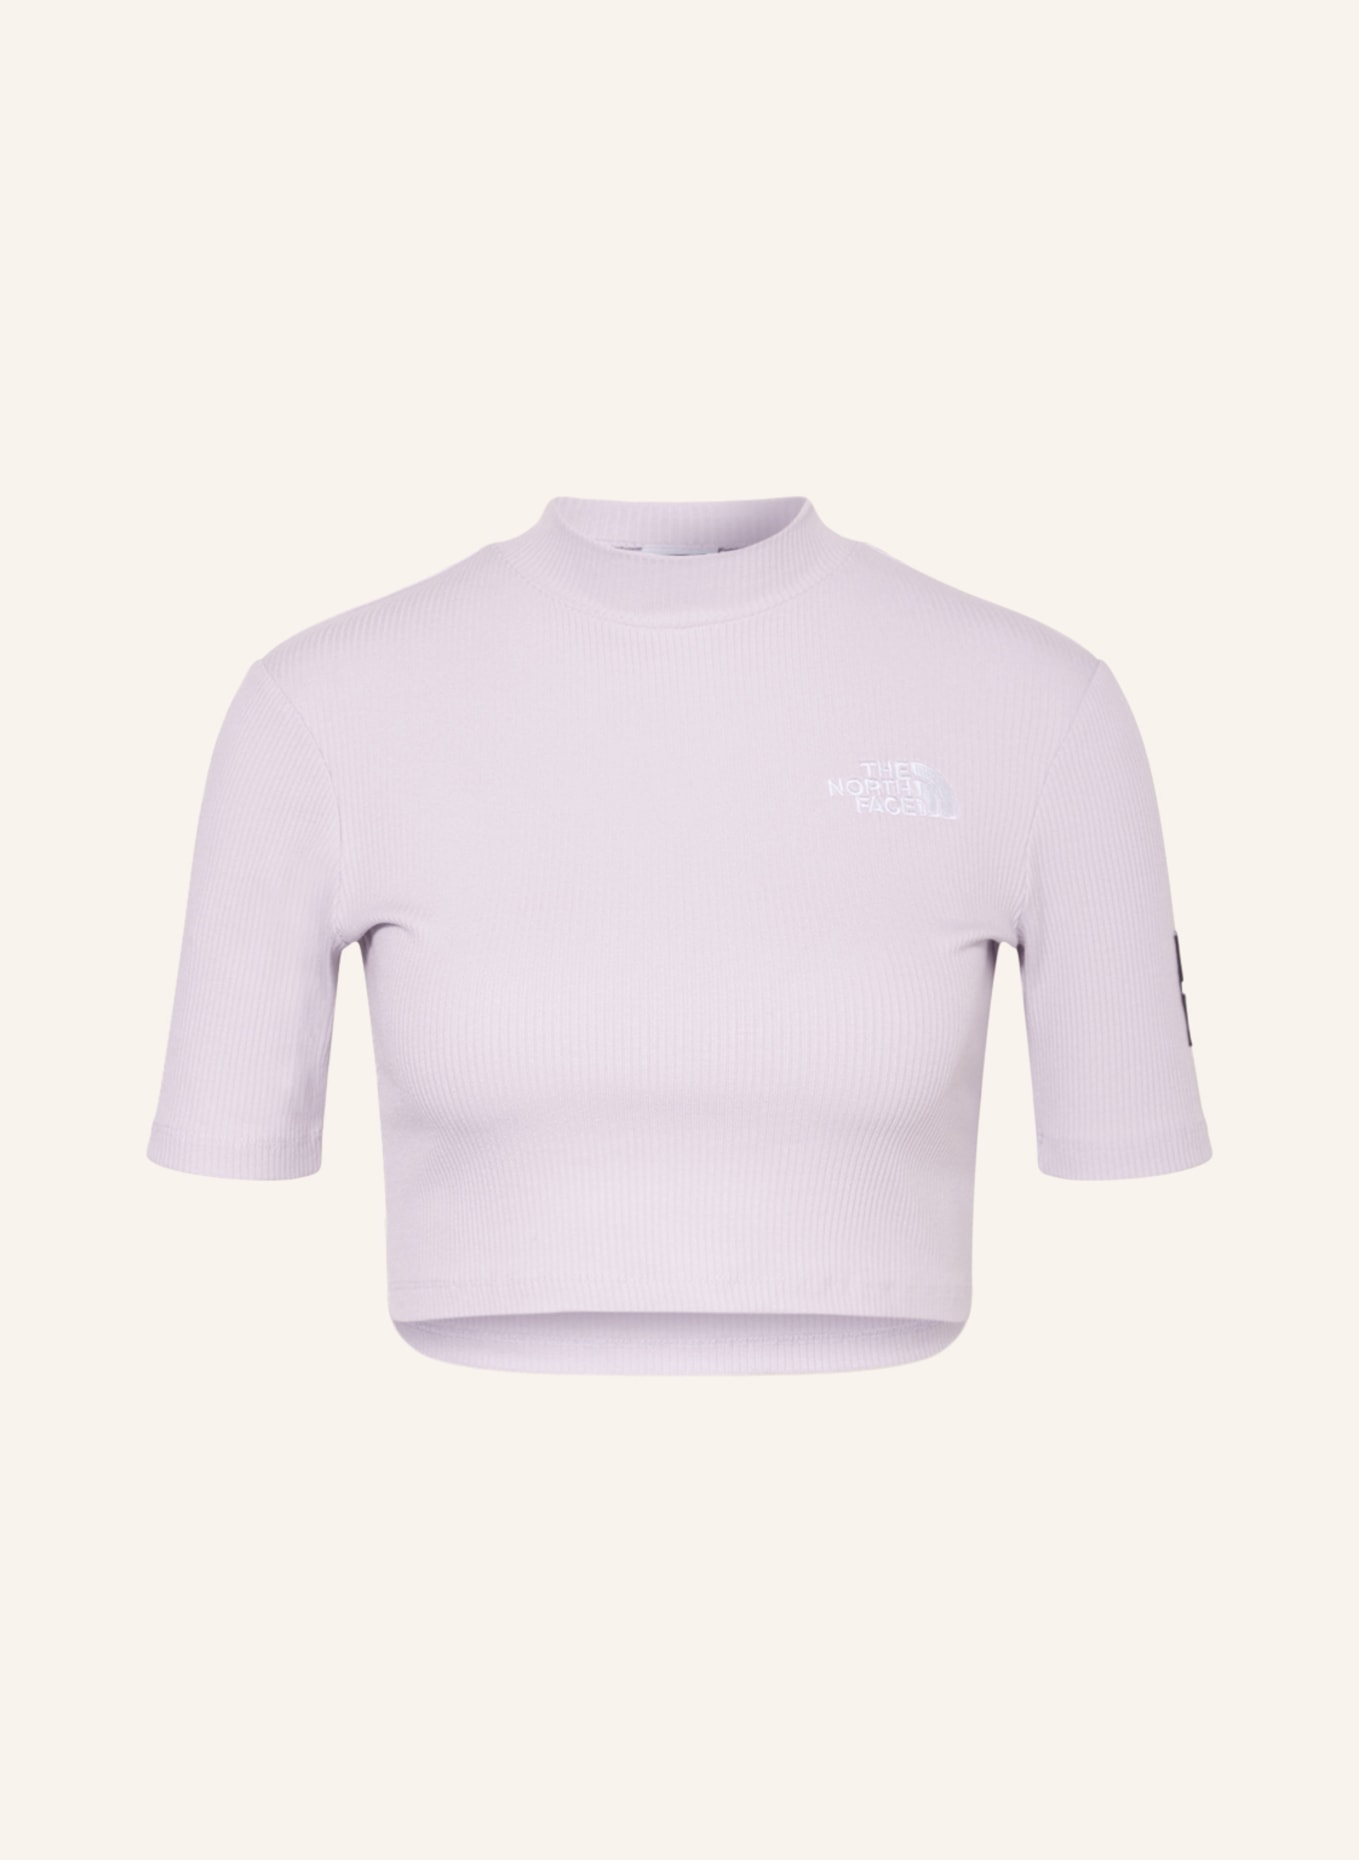 THE NORTH FACE Cropped-Shirt , Farbe: HELLLILA (Bild 1)